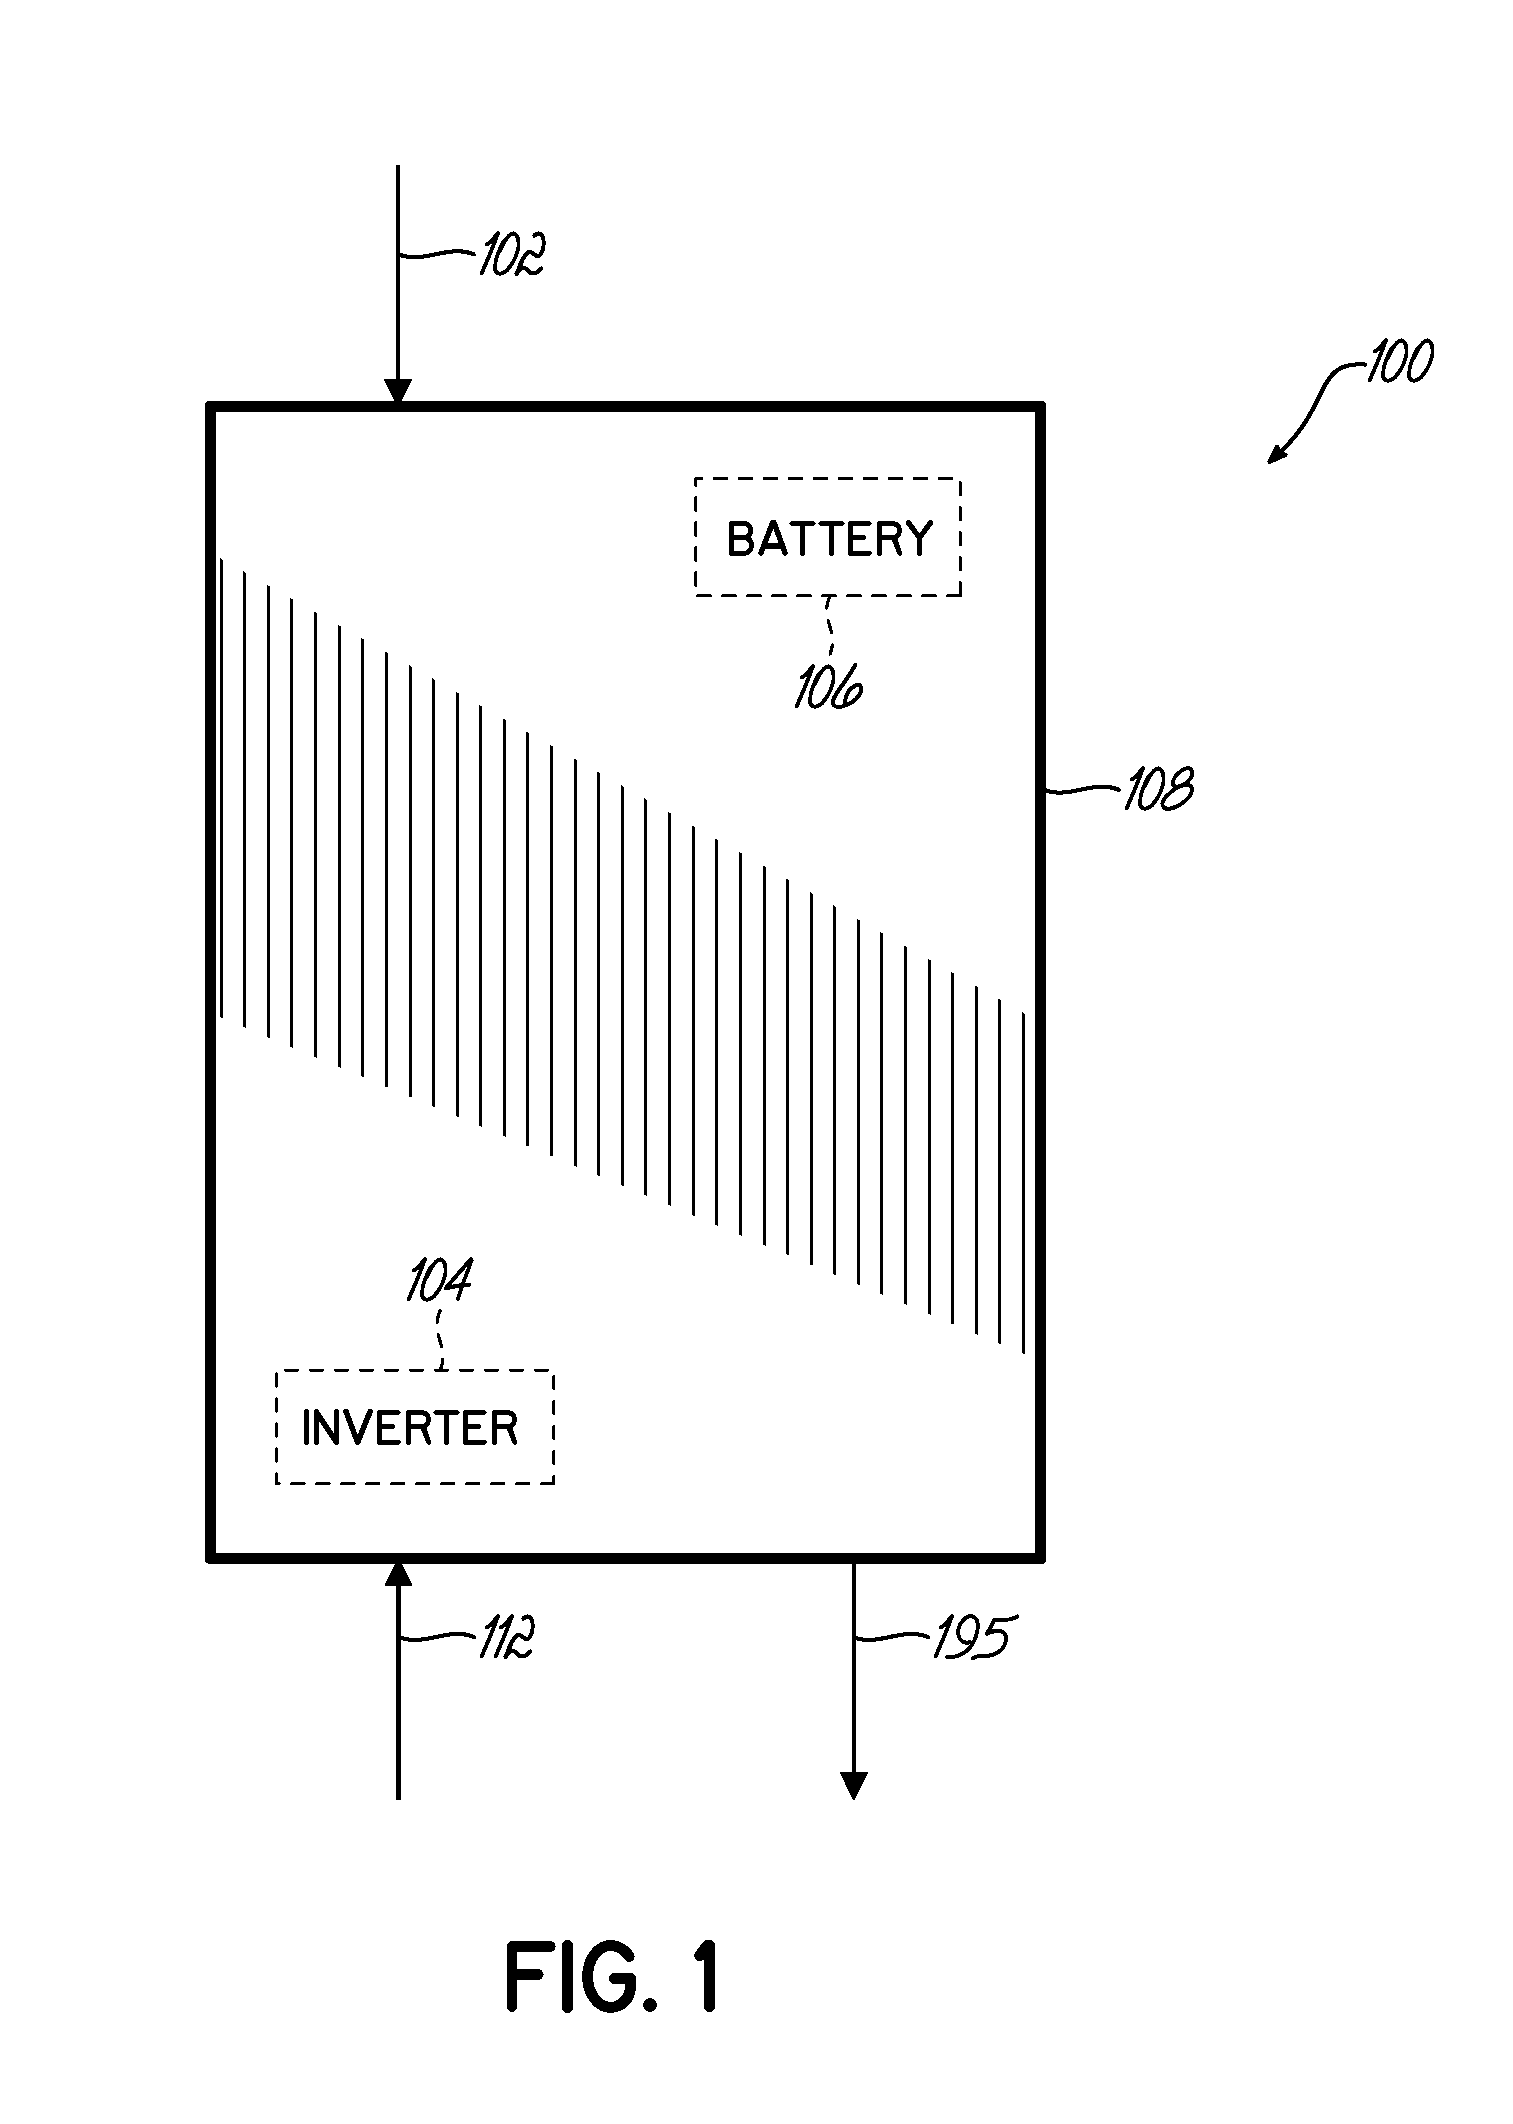 Solar Power Generation, Distribution, and Communication System